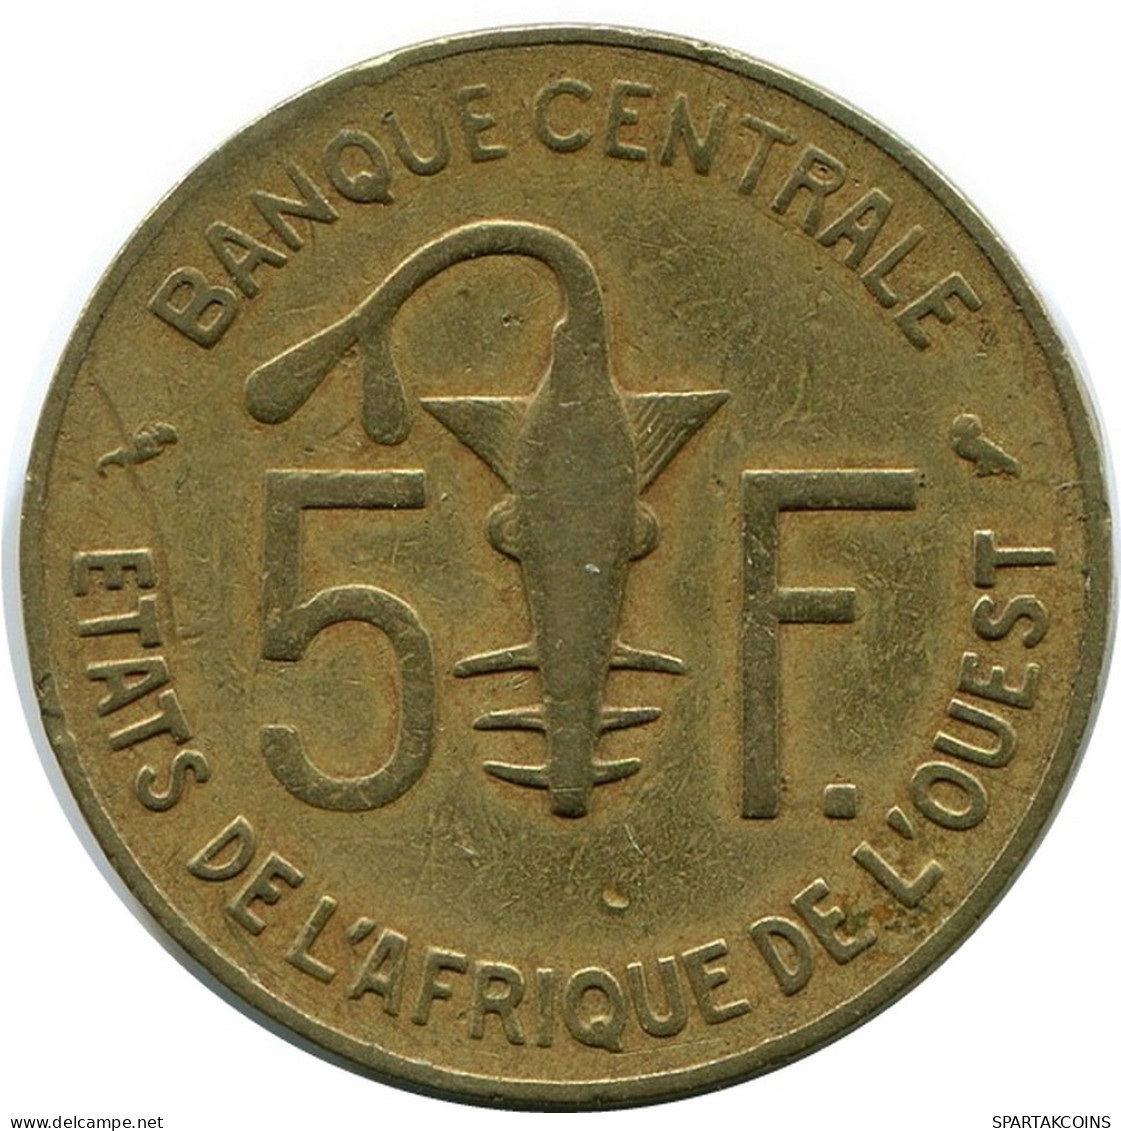 5 FRANCS 1970 WESTERN AFRICAN STATES Münze #AR264.D.A - Andere - Afrika